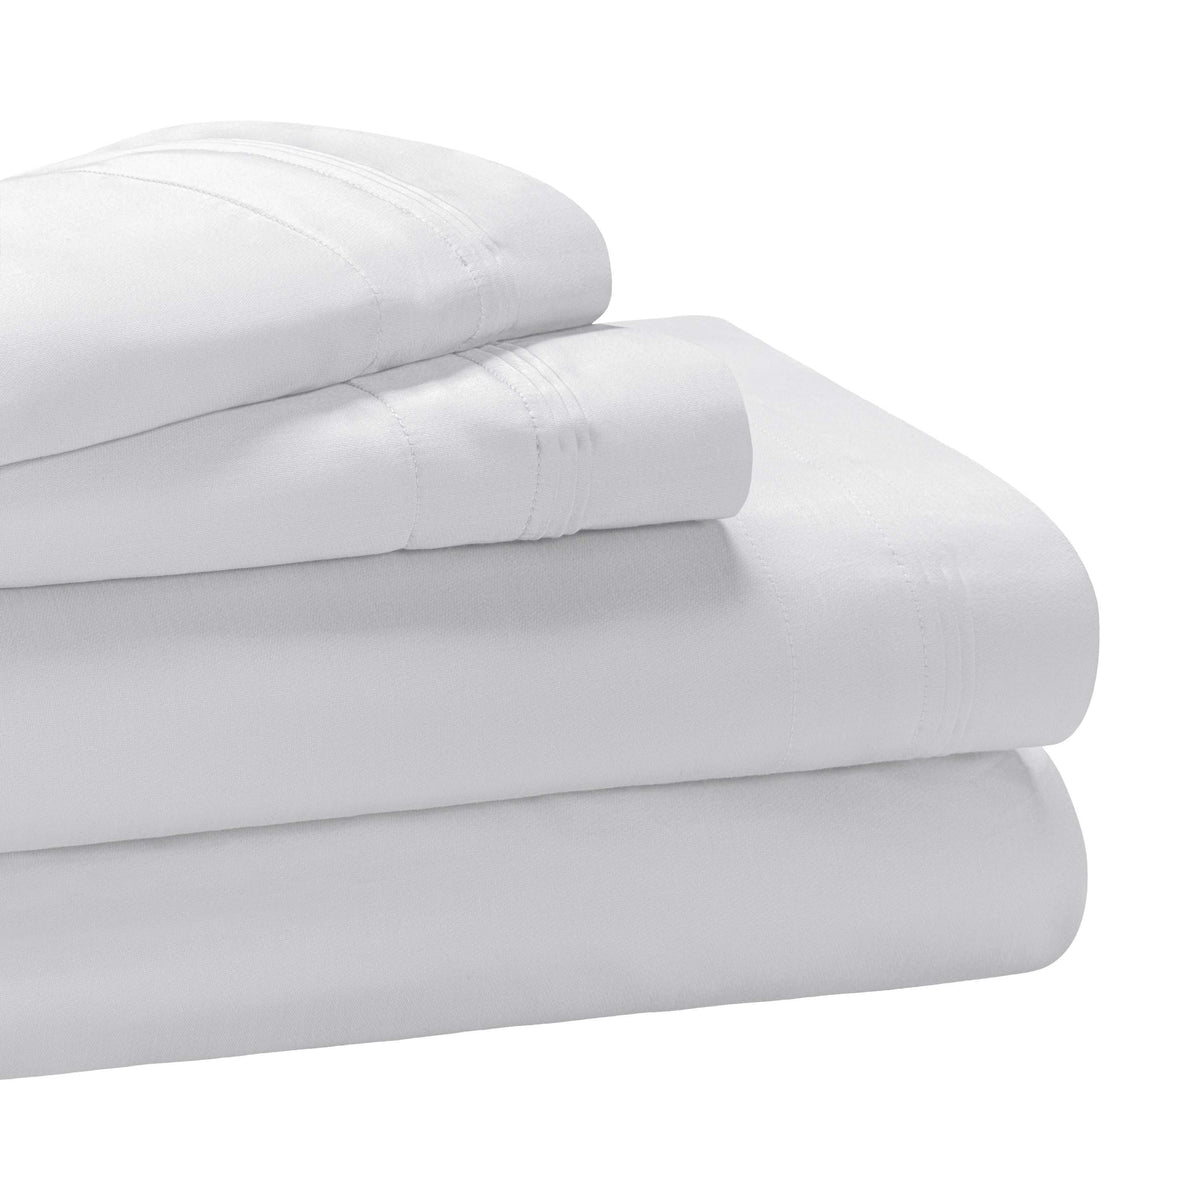 Egyptian Cotton 1000 Thread Count Eco-Friendly Solid Sheet Set - Platinum